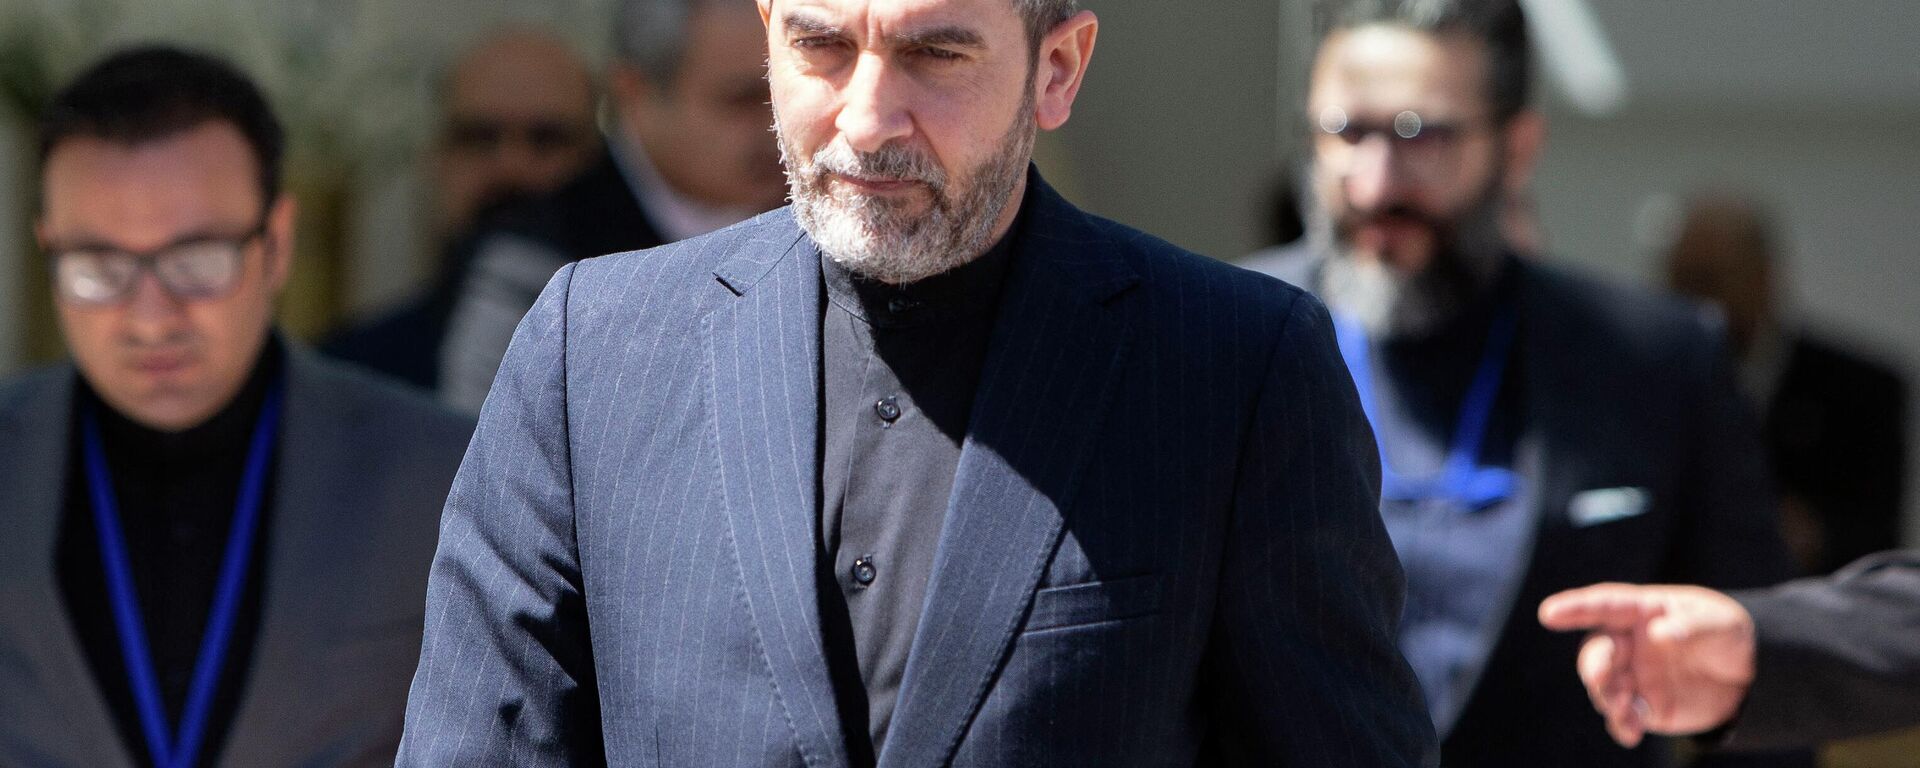 Iran's chief nuclear negotiator Ali Bagheri Kani leaves after talks at the Coburg Palais, the venue of the Joint Comprehensive Plan of Action (JCPOA) in Vienna on August 4, 2022. - Sputnik International, 1920, 16.08.2022